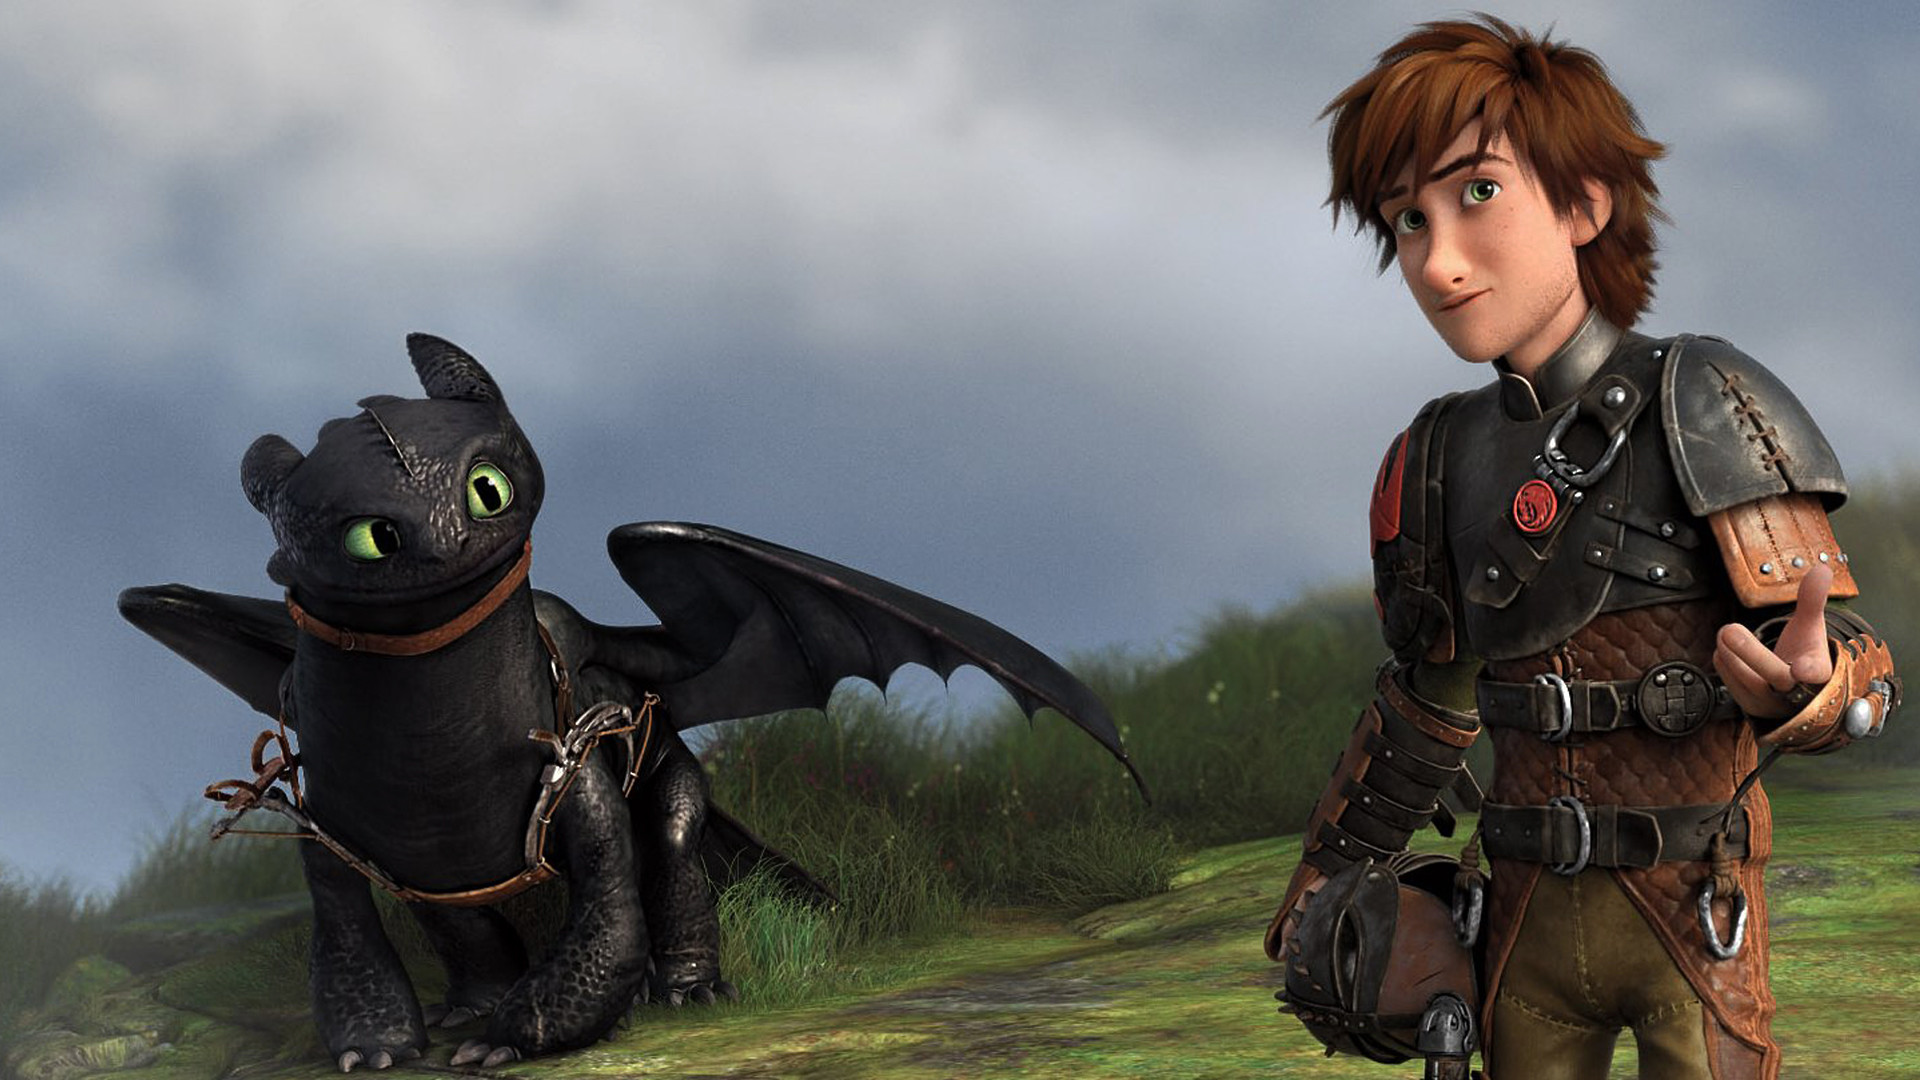 1920x1080 ... 12 hd how to train your dragon movie wallpapers hdwallsource com ...